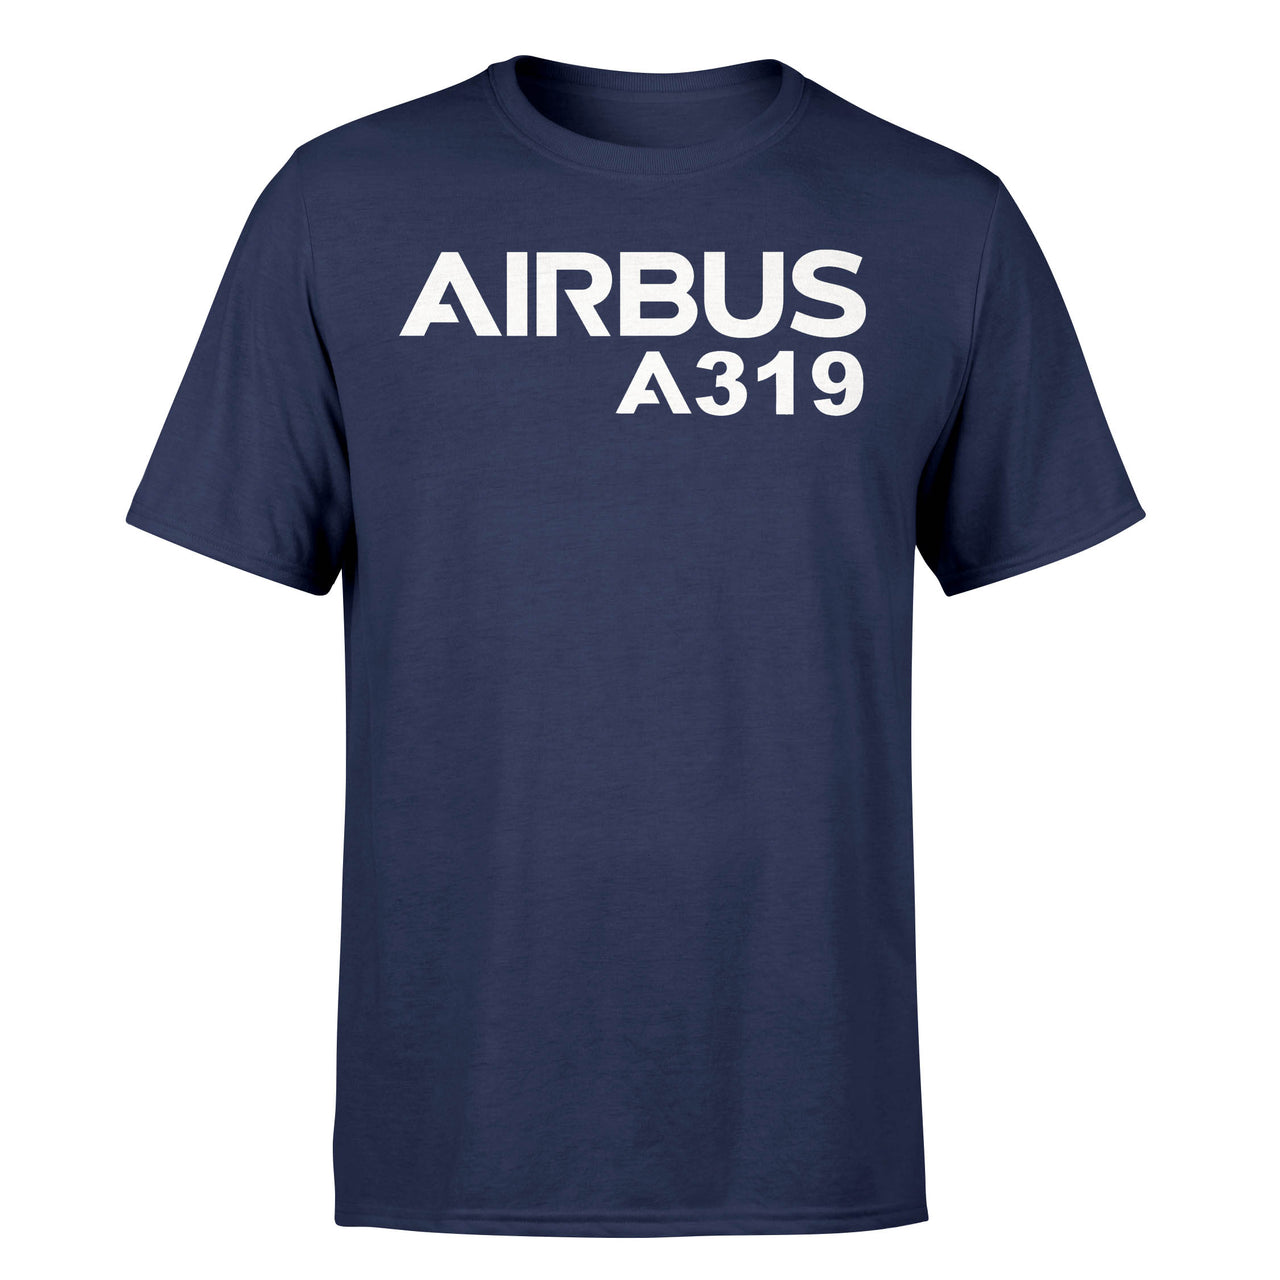 Airbus A319 & Text Designed T-Shirts